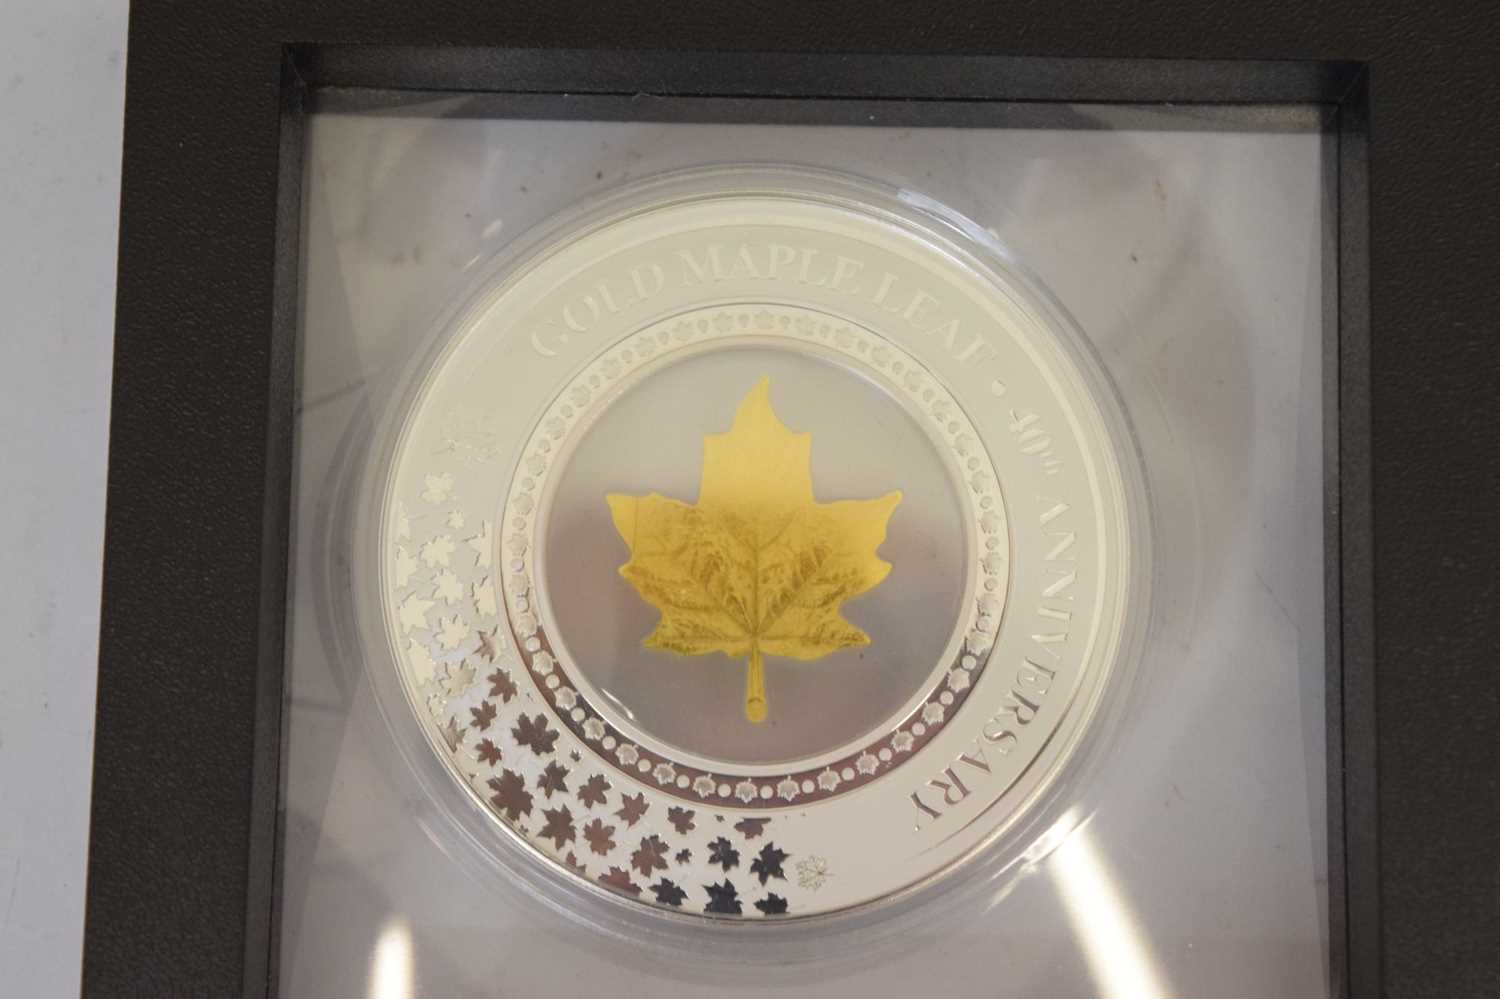 Solomon Islands silver proof 40th Anniversary 5 Dollar gold maple leaf medallion - Image 3 of 7